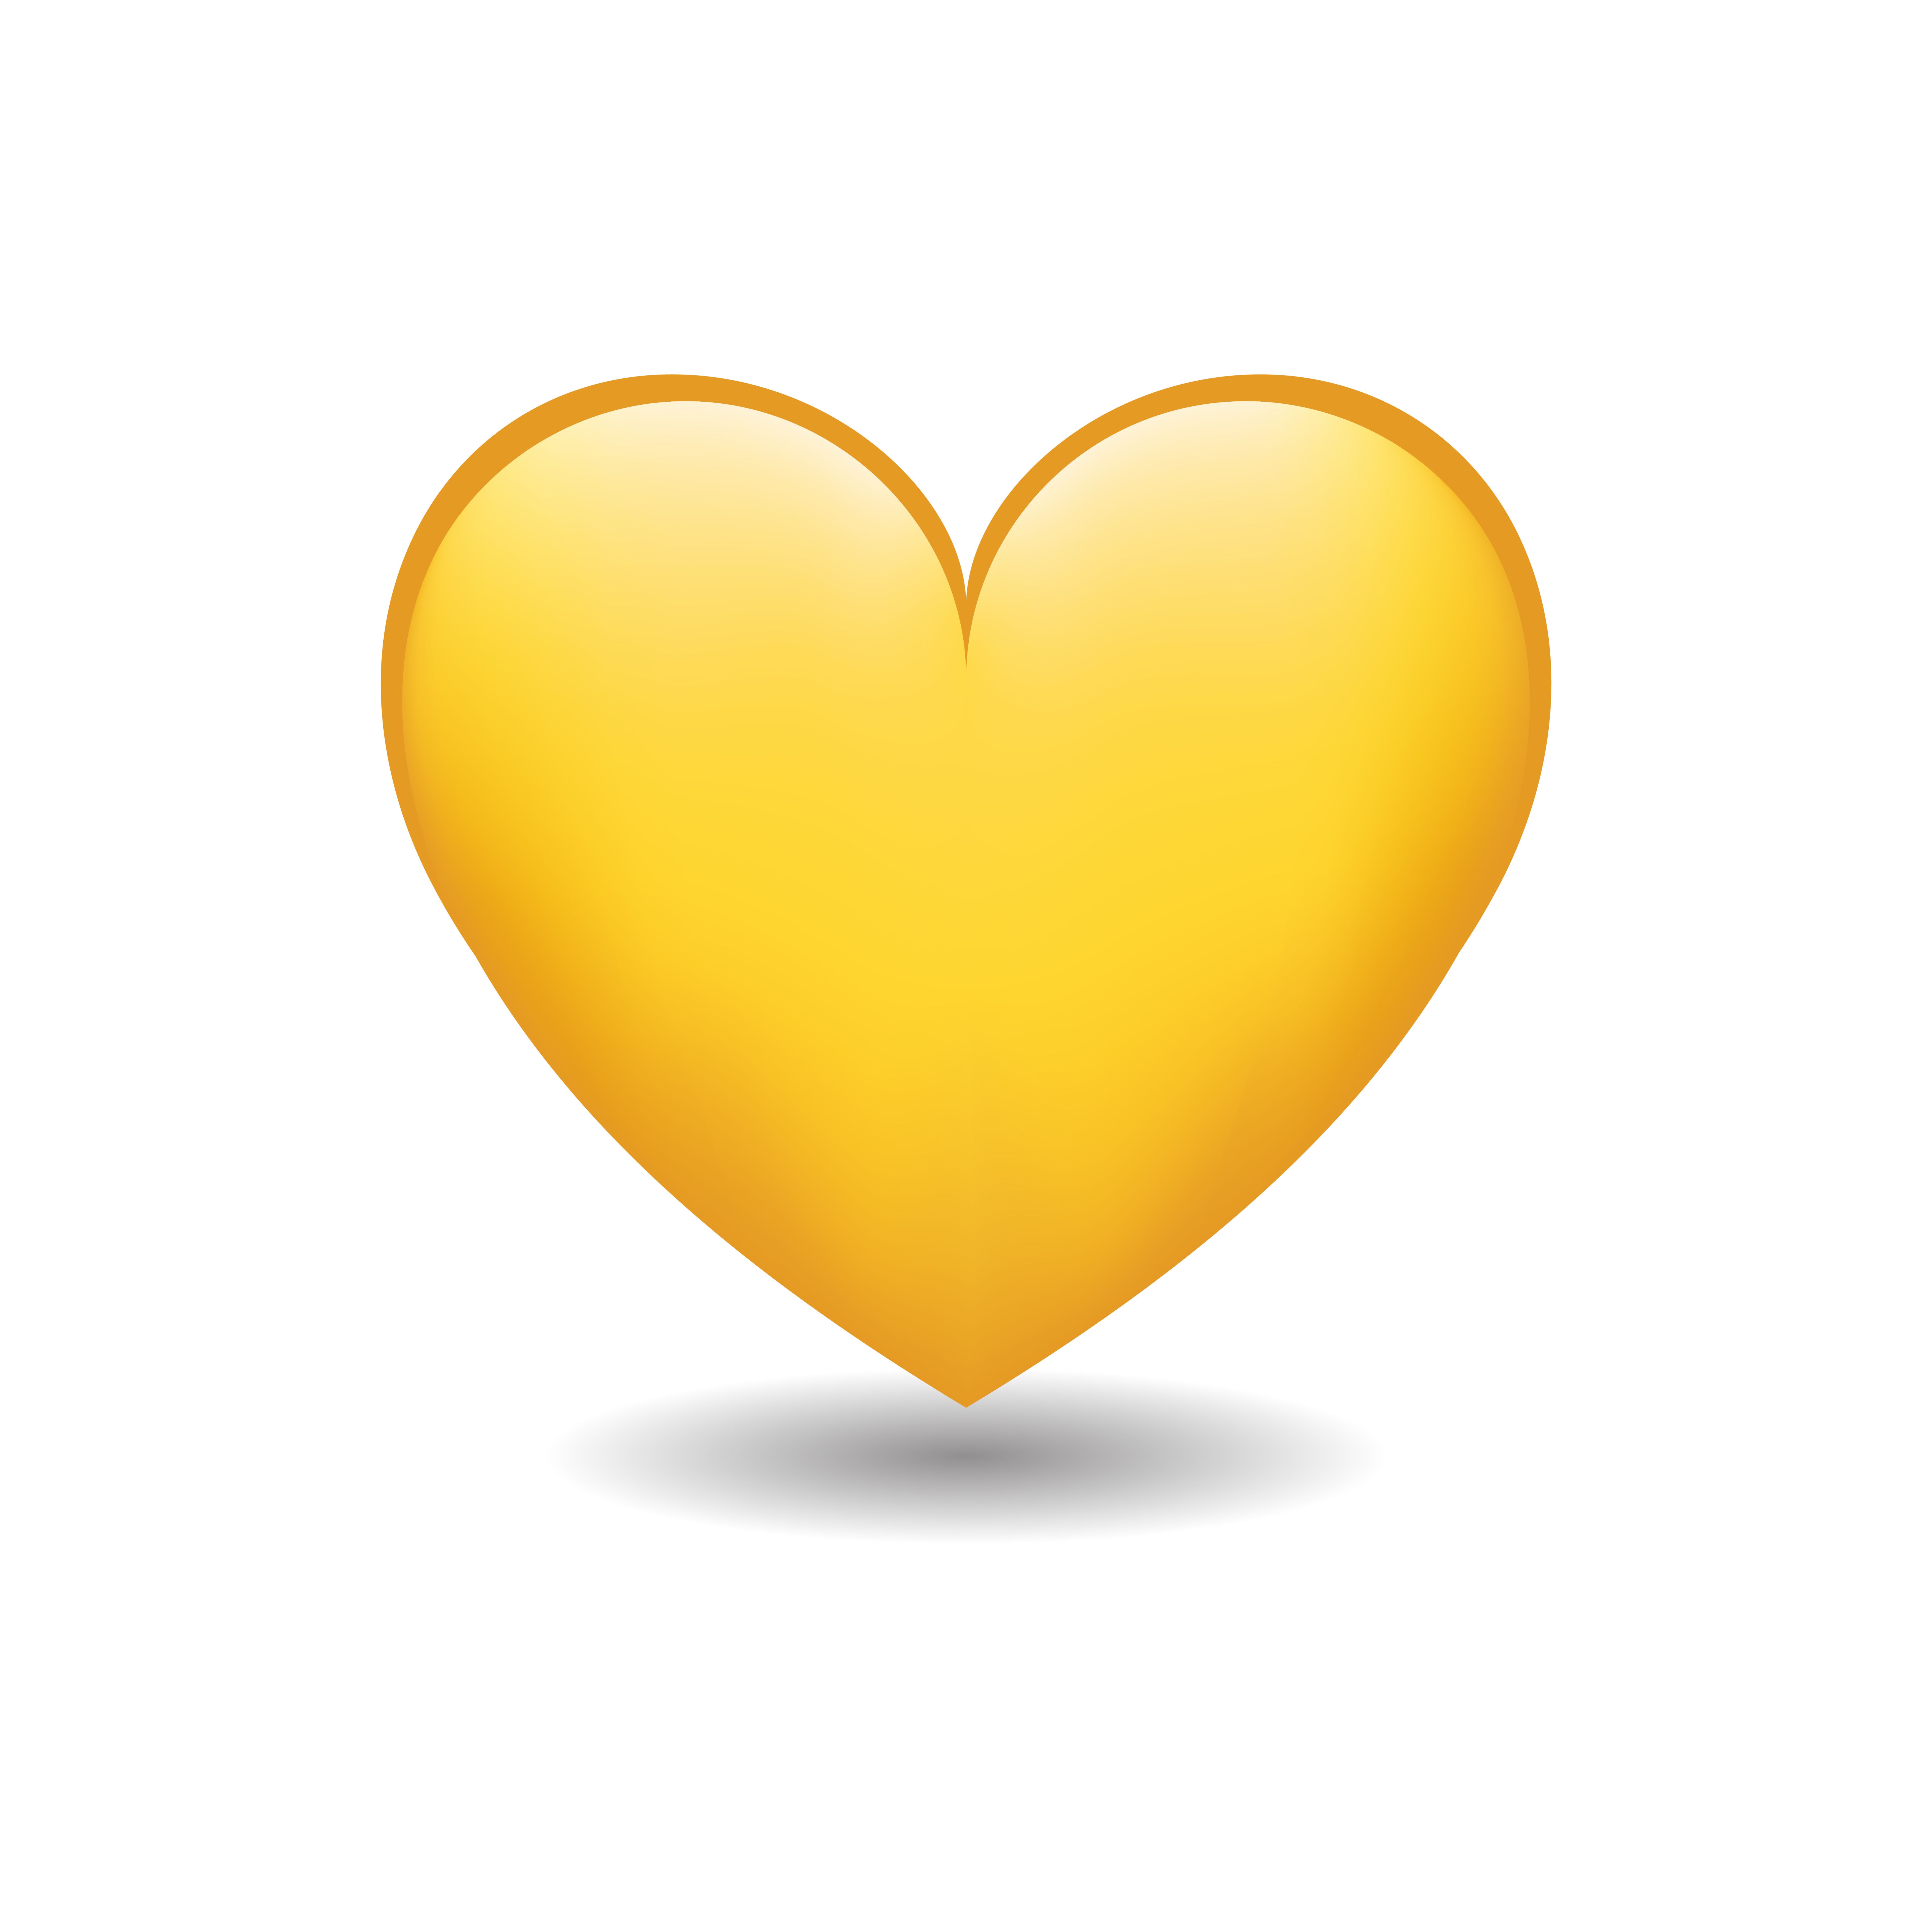 Emojis: What do the grey, pink and blue heart emojis really mean when  texting?